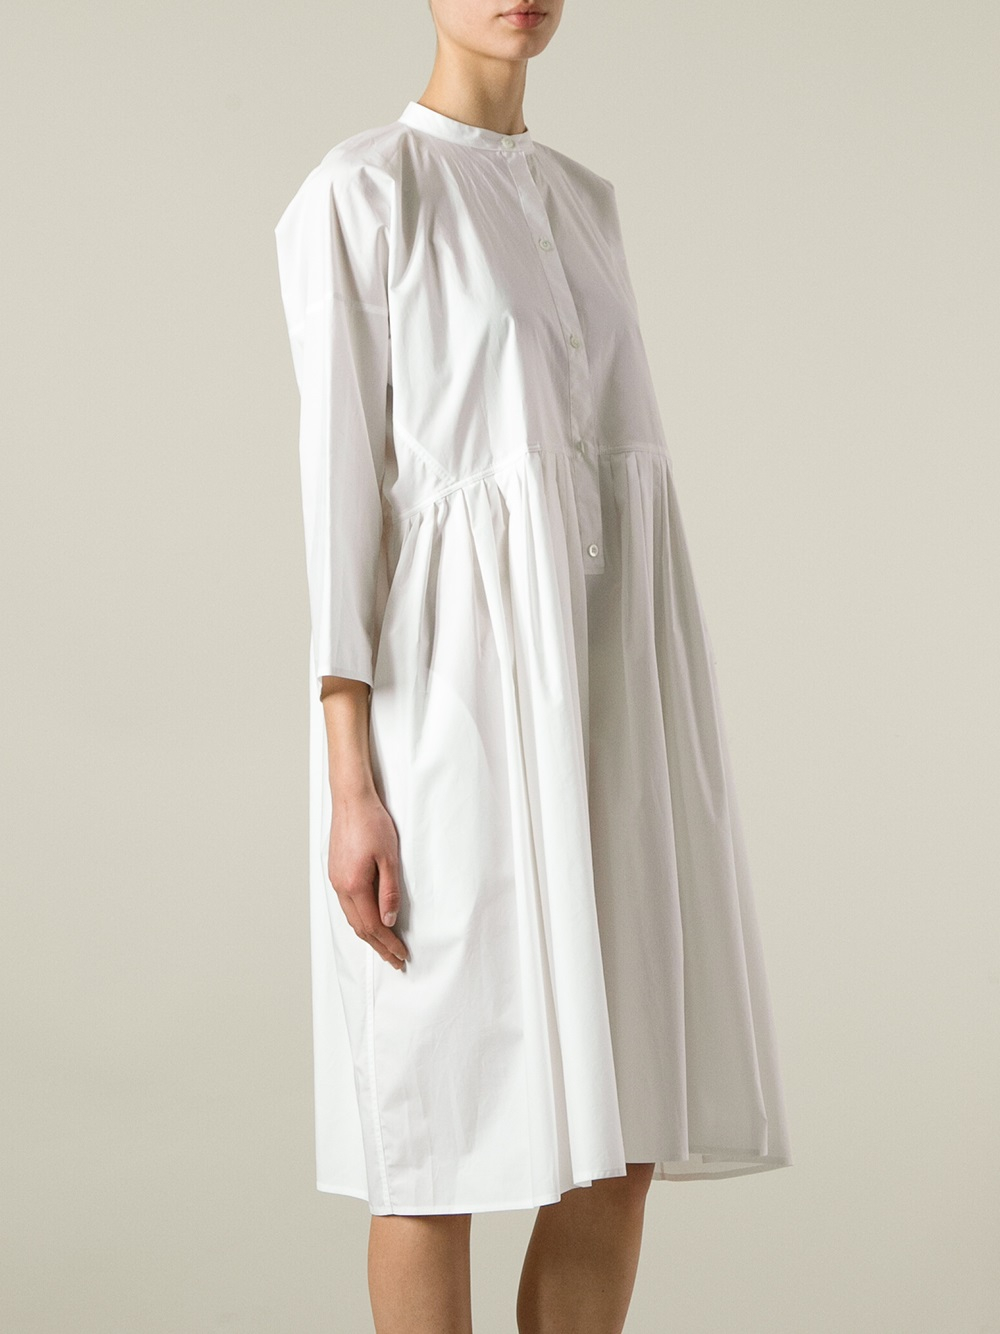 Lyst Sofie Dhoore `doksy` Empire Line Dress In White